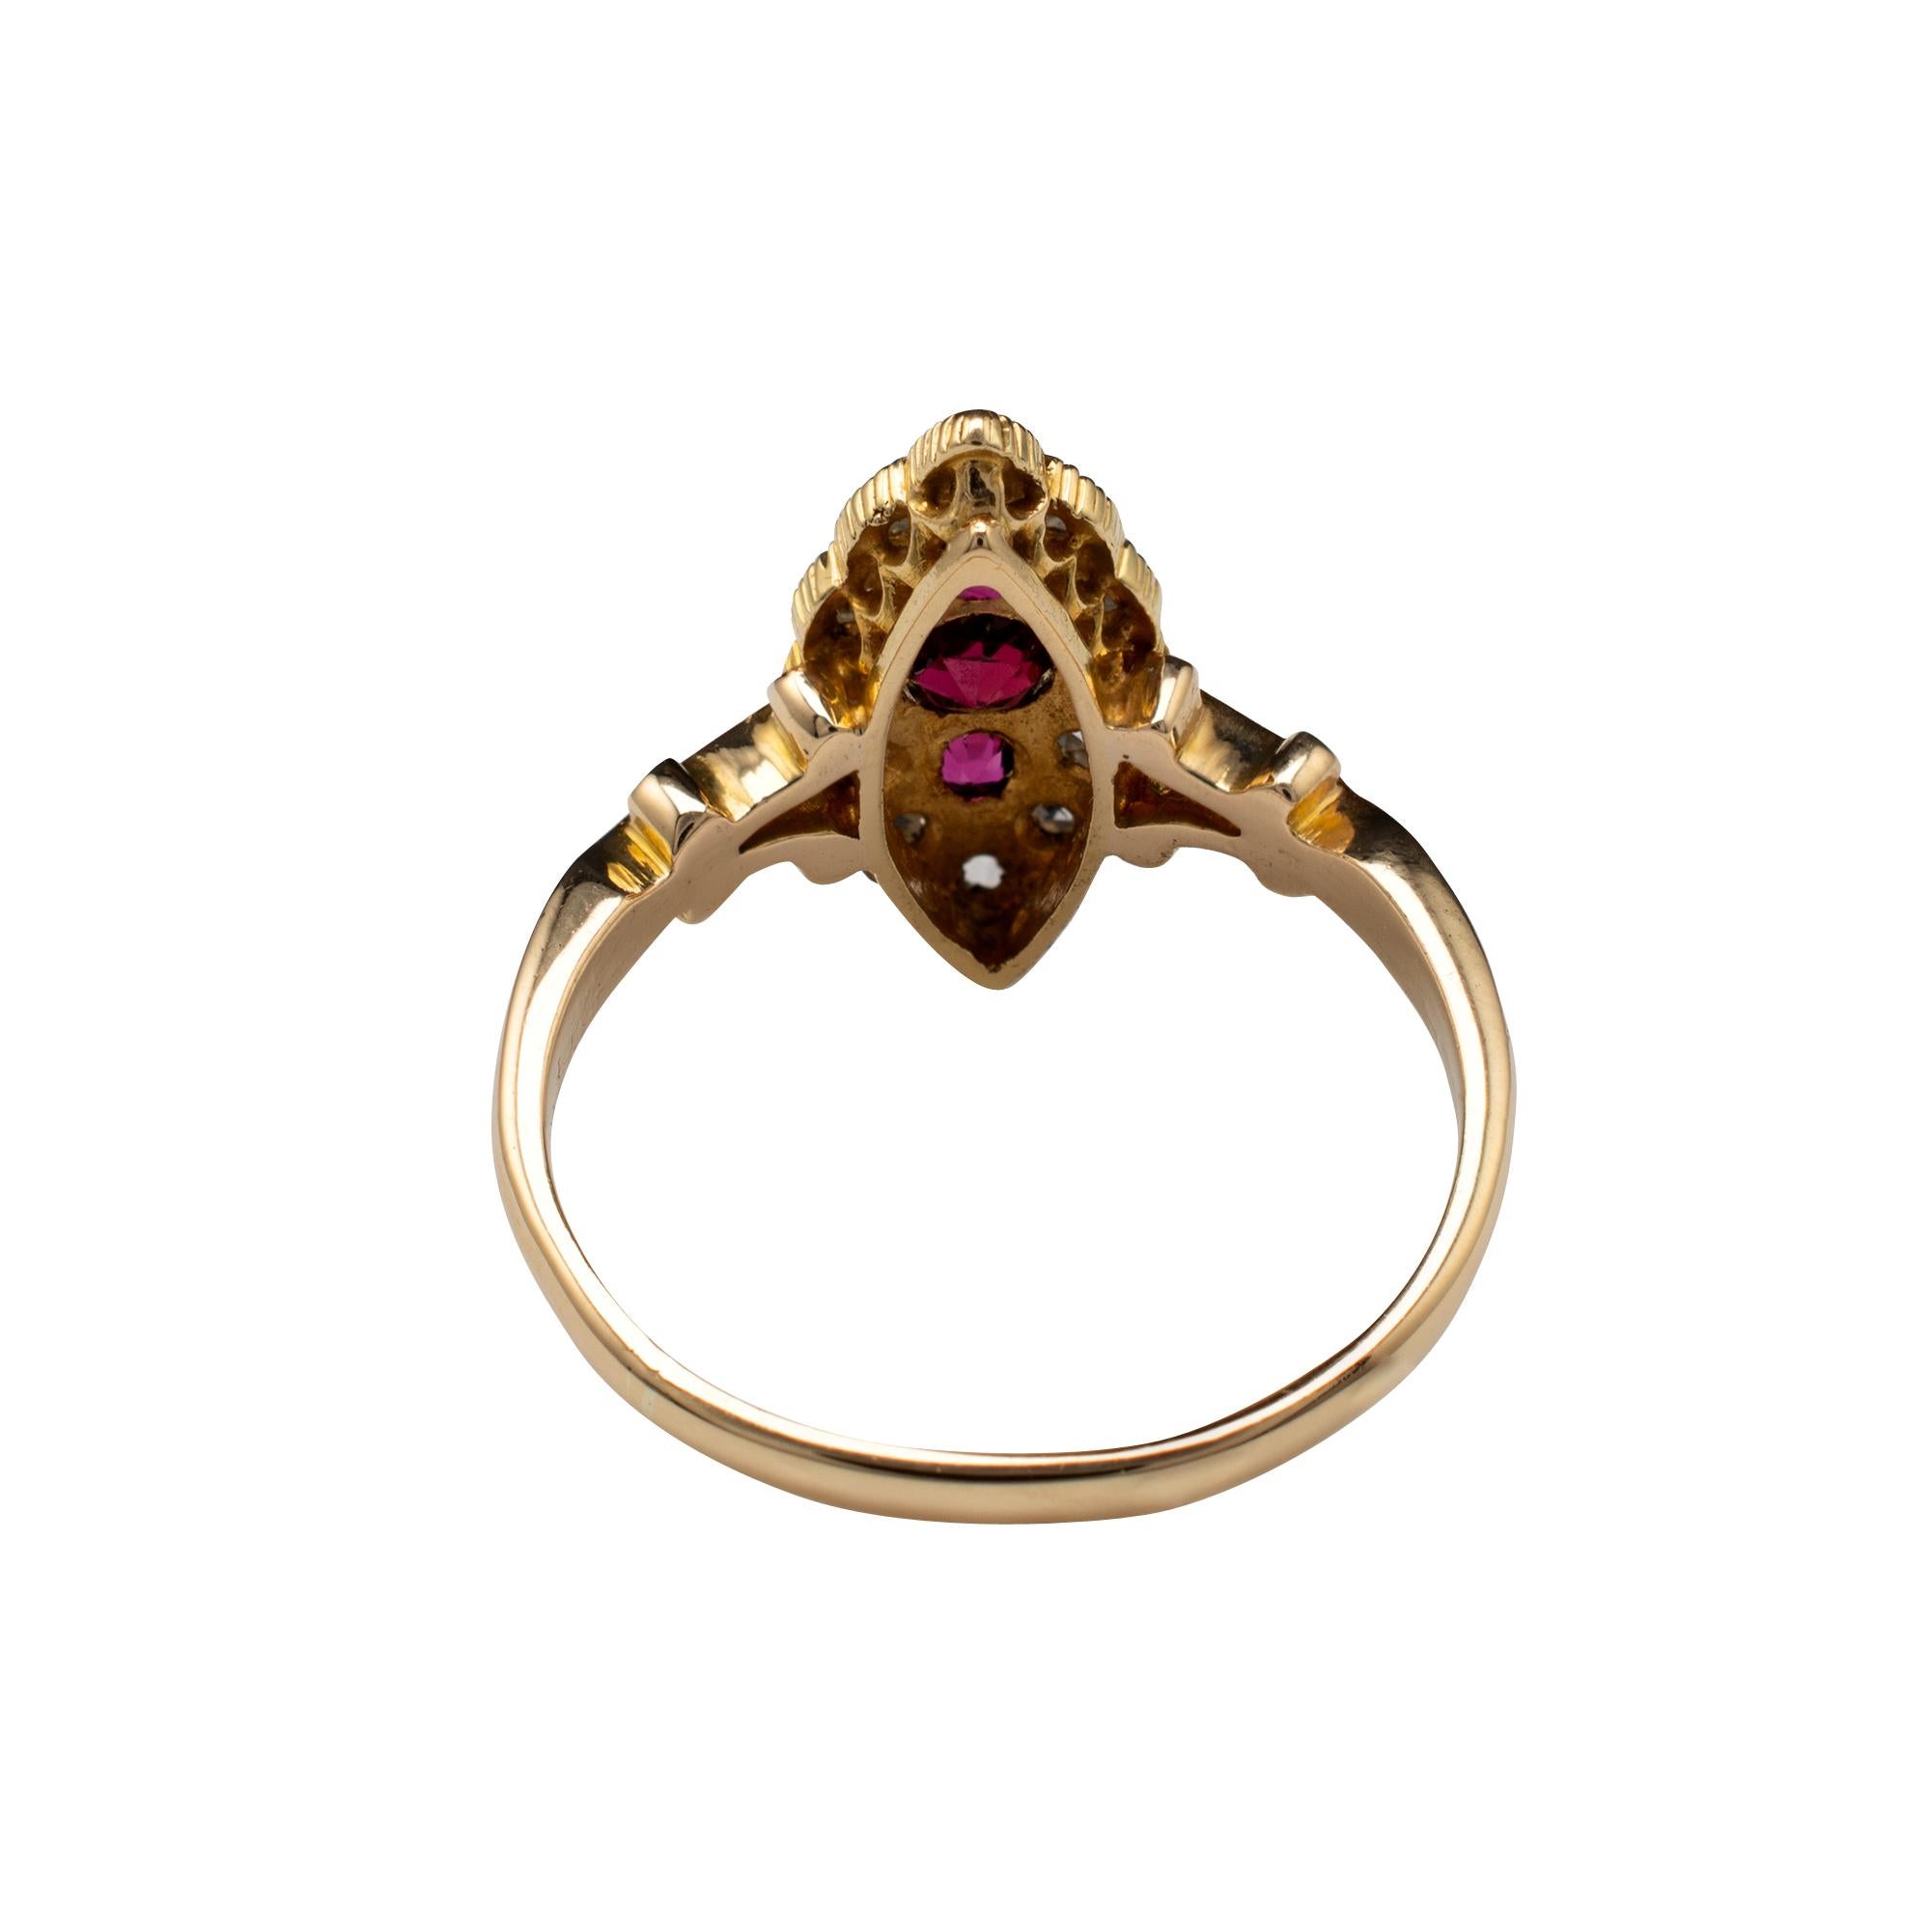 Art Deco Antique Marquise Ring Ruby and Diamond Ring, 18 Karat Gold Chester Hallmarks